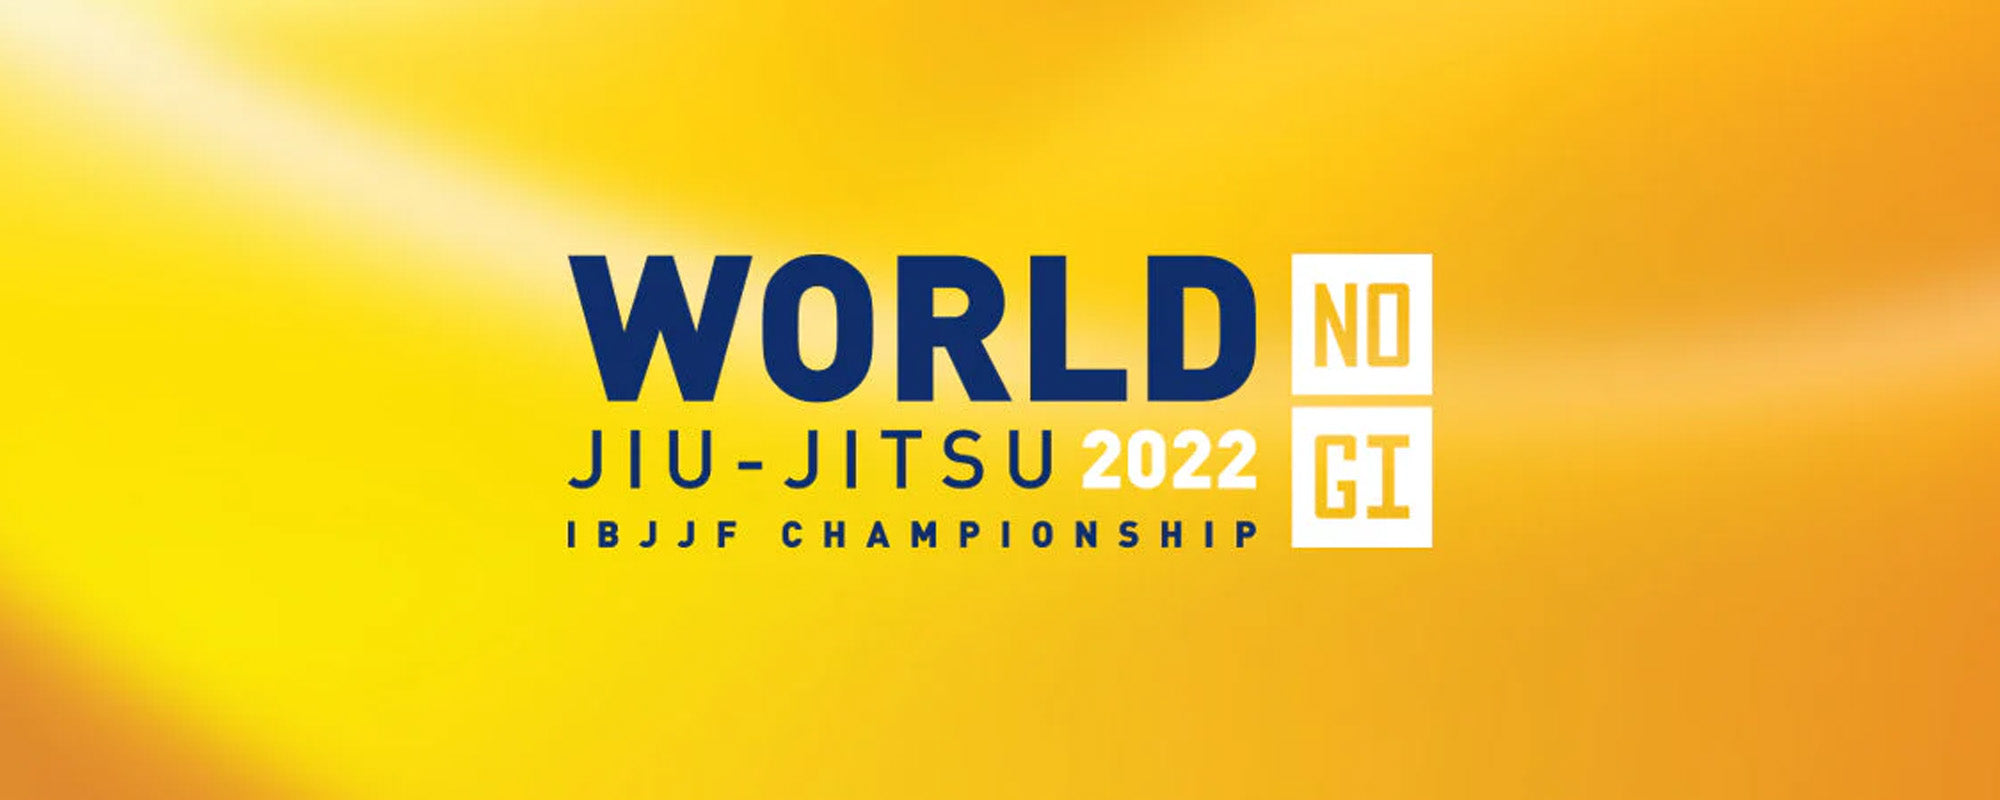 IBJJF has officially released the brackets for the 2022 No-Gi World Championships